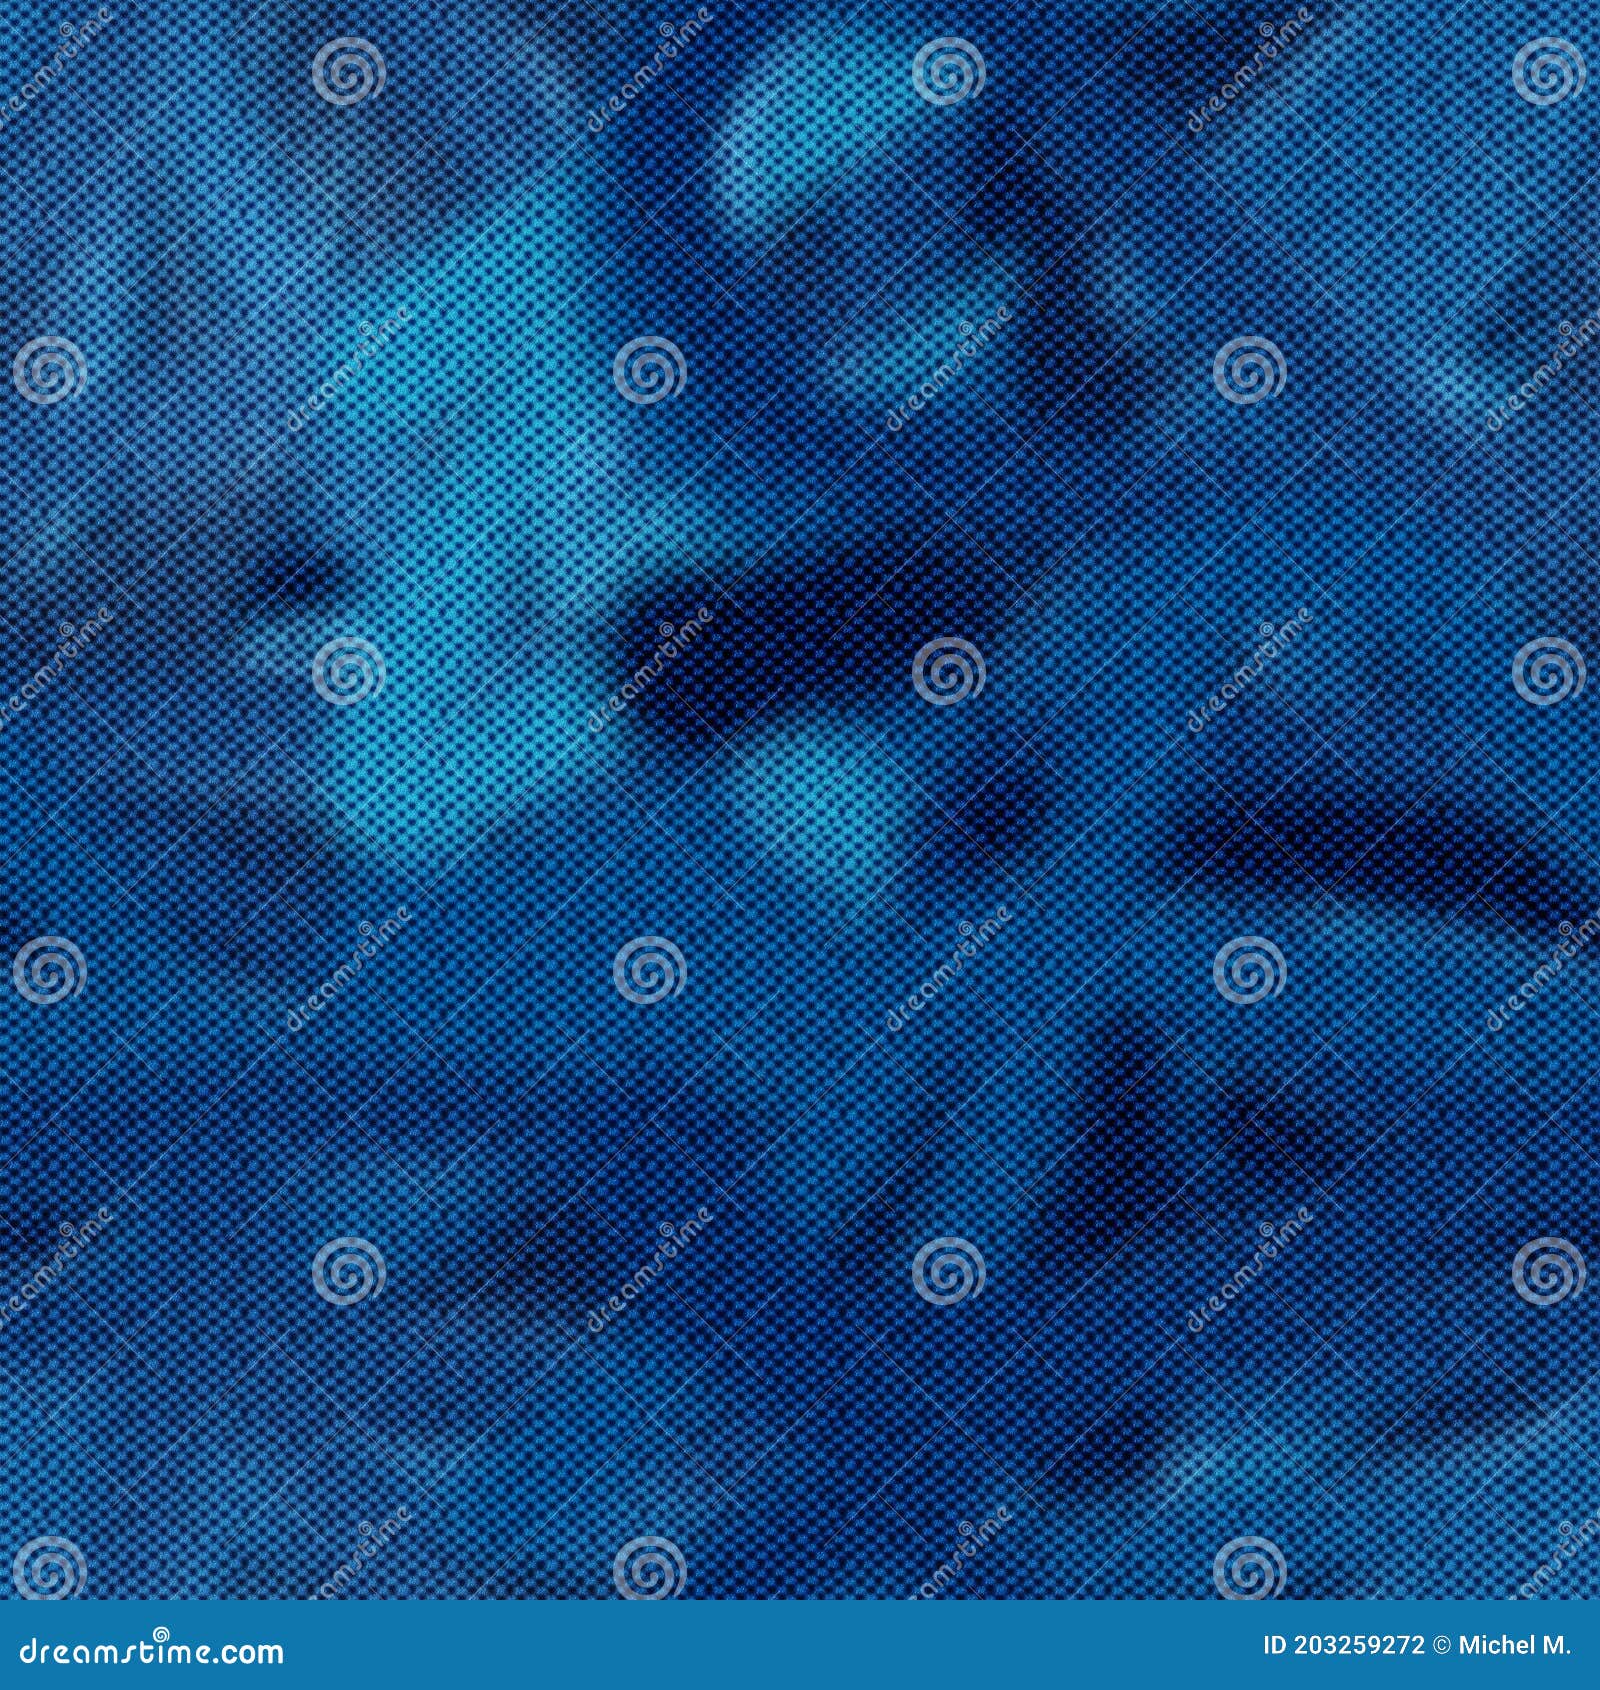 texture of faded jeans denim background pattern seamless copiar